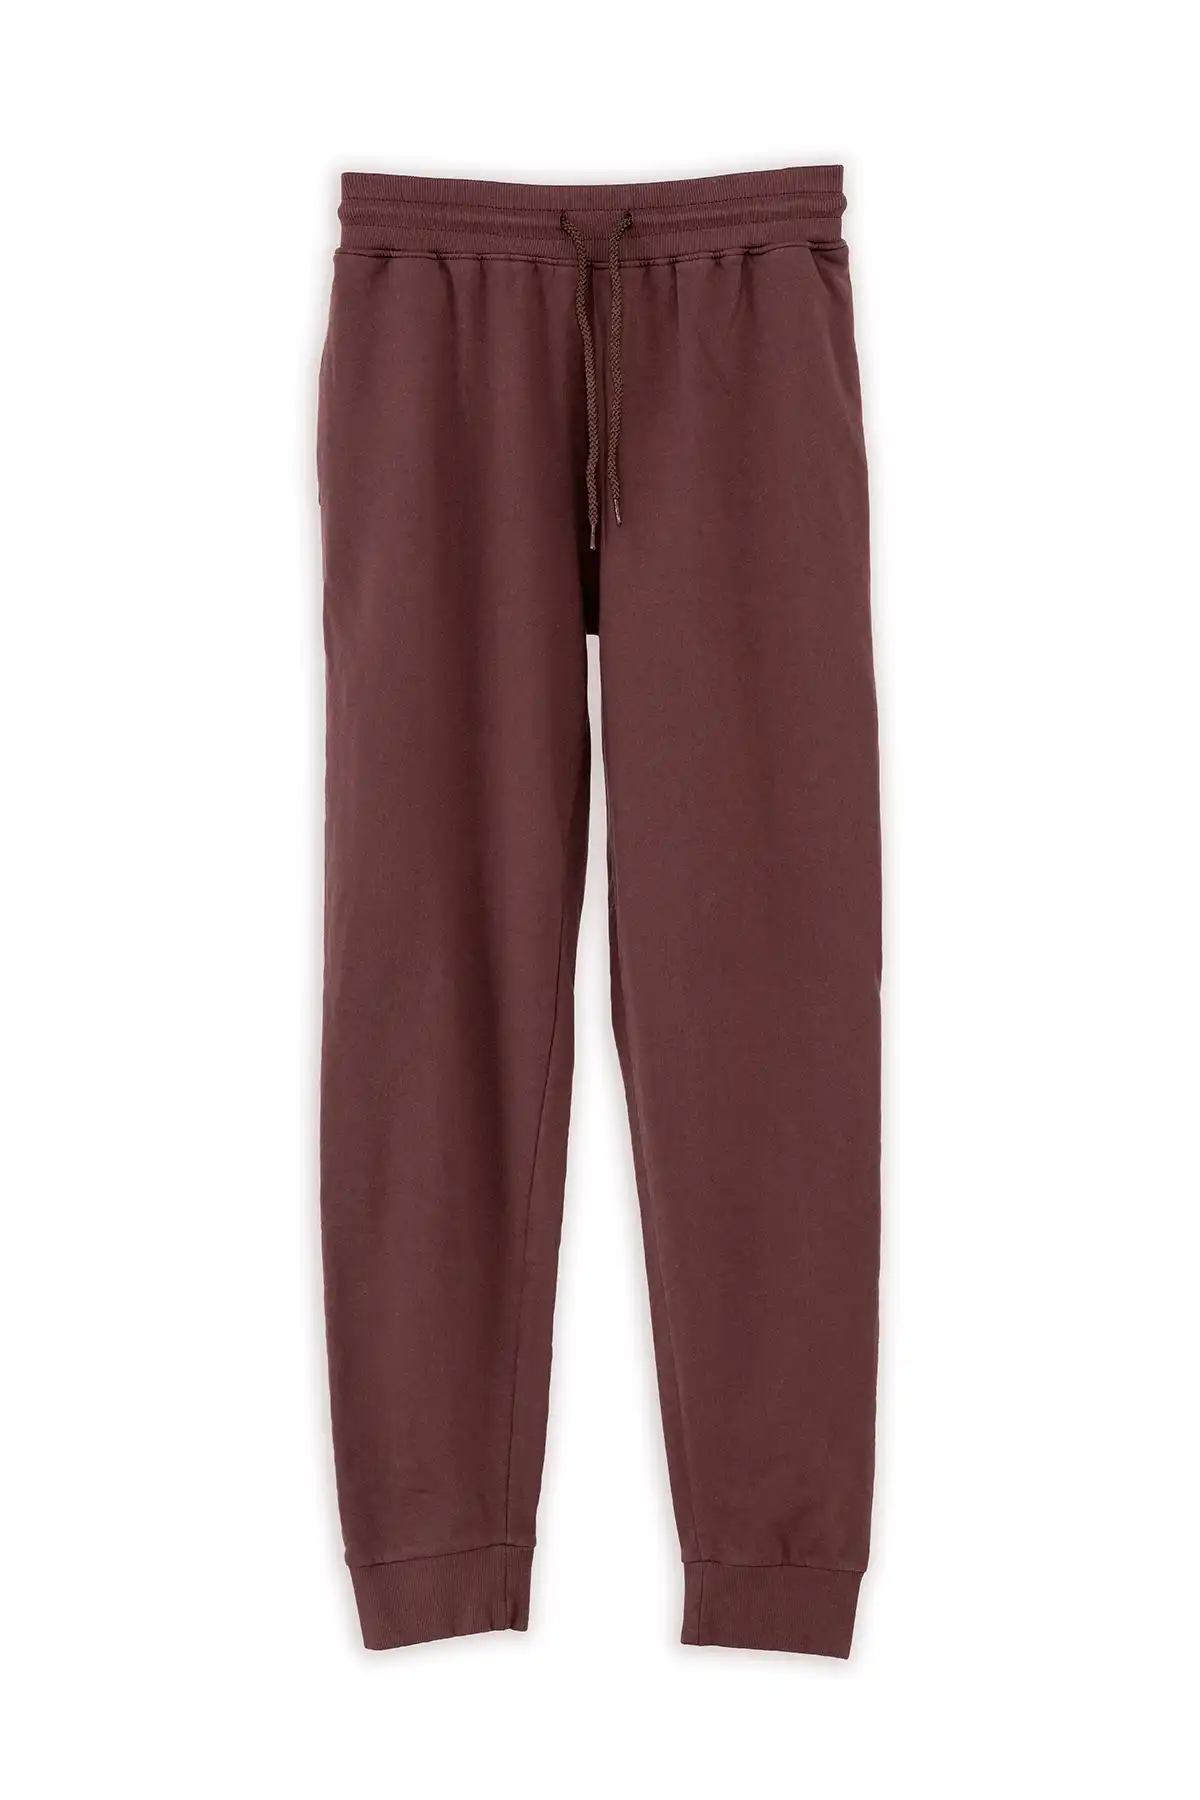 Regular Fit Unisex Joggers - Coco Brown